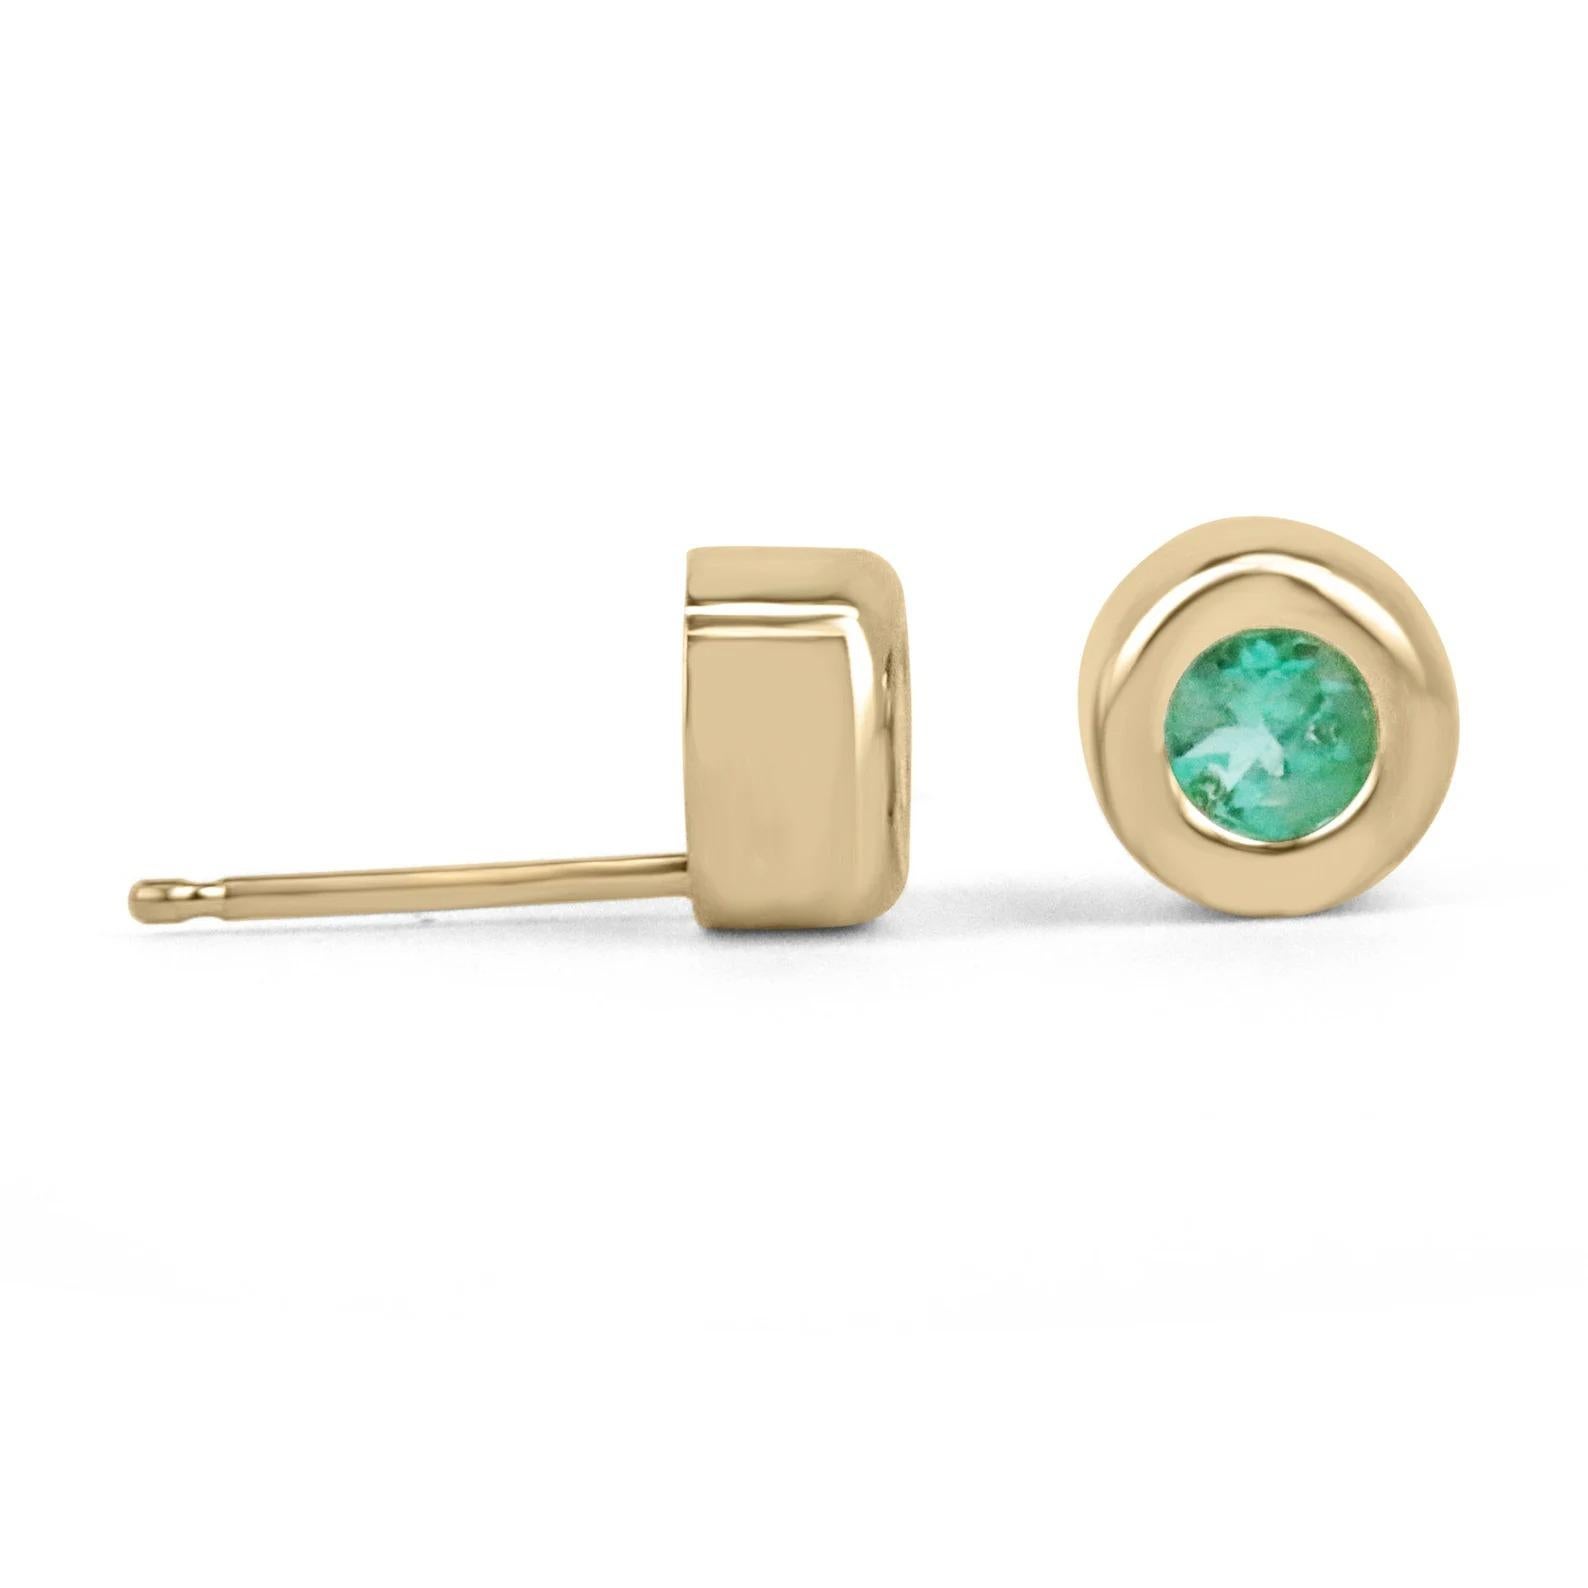 A stunning and simple pair of emerald stud earrings. This delicate and dainty pair, showcase two petite round cut Colombian emeralds weighing a total of half a carat. The gemstones display a beautiful light spring green color, and amazing